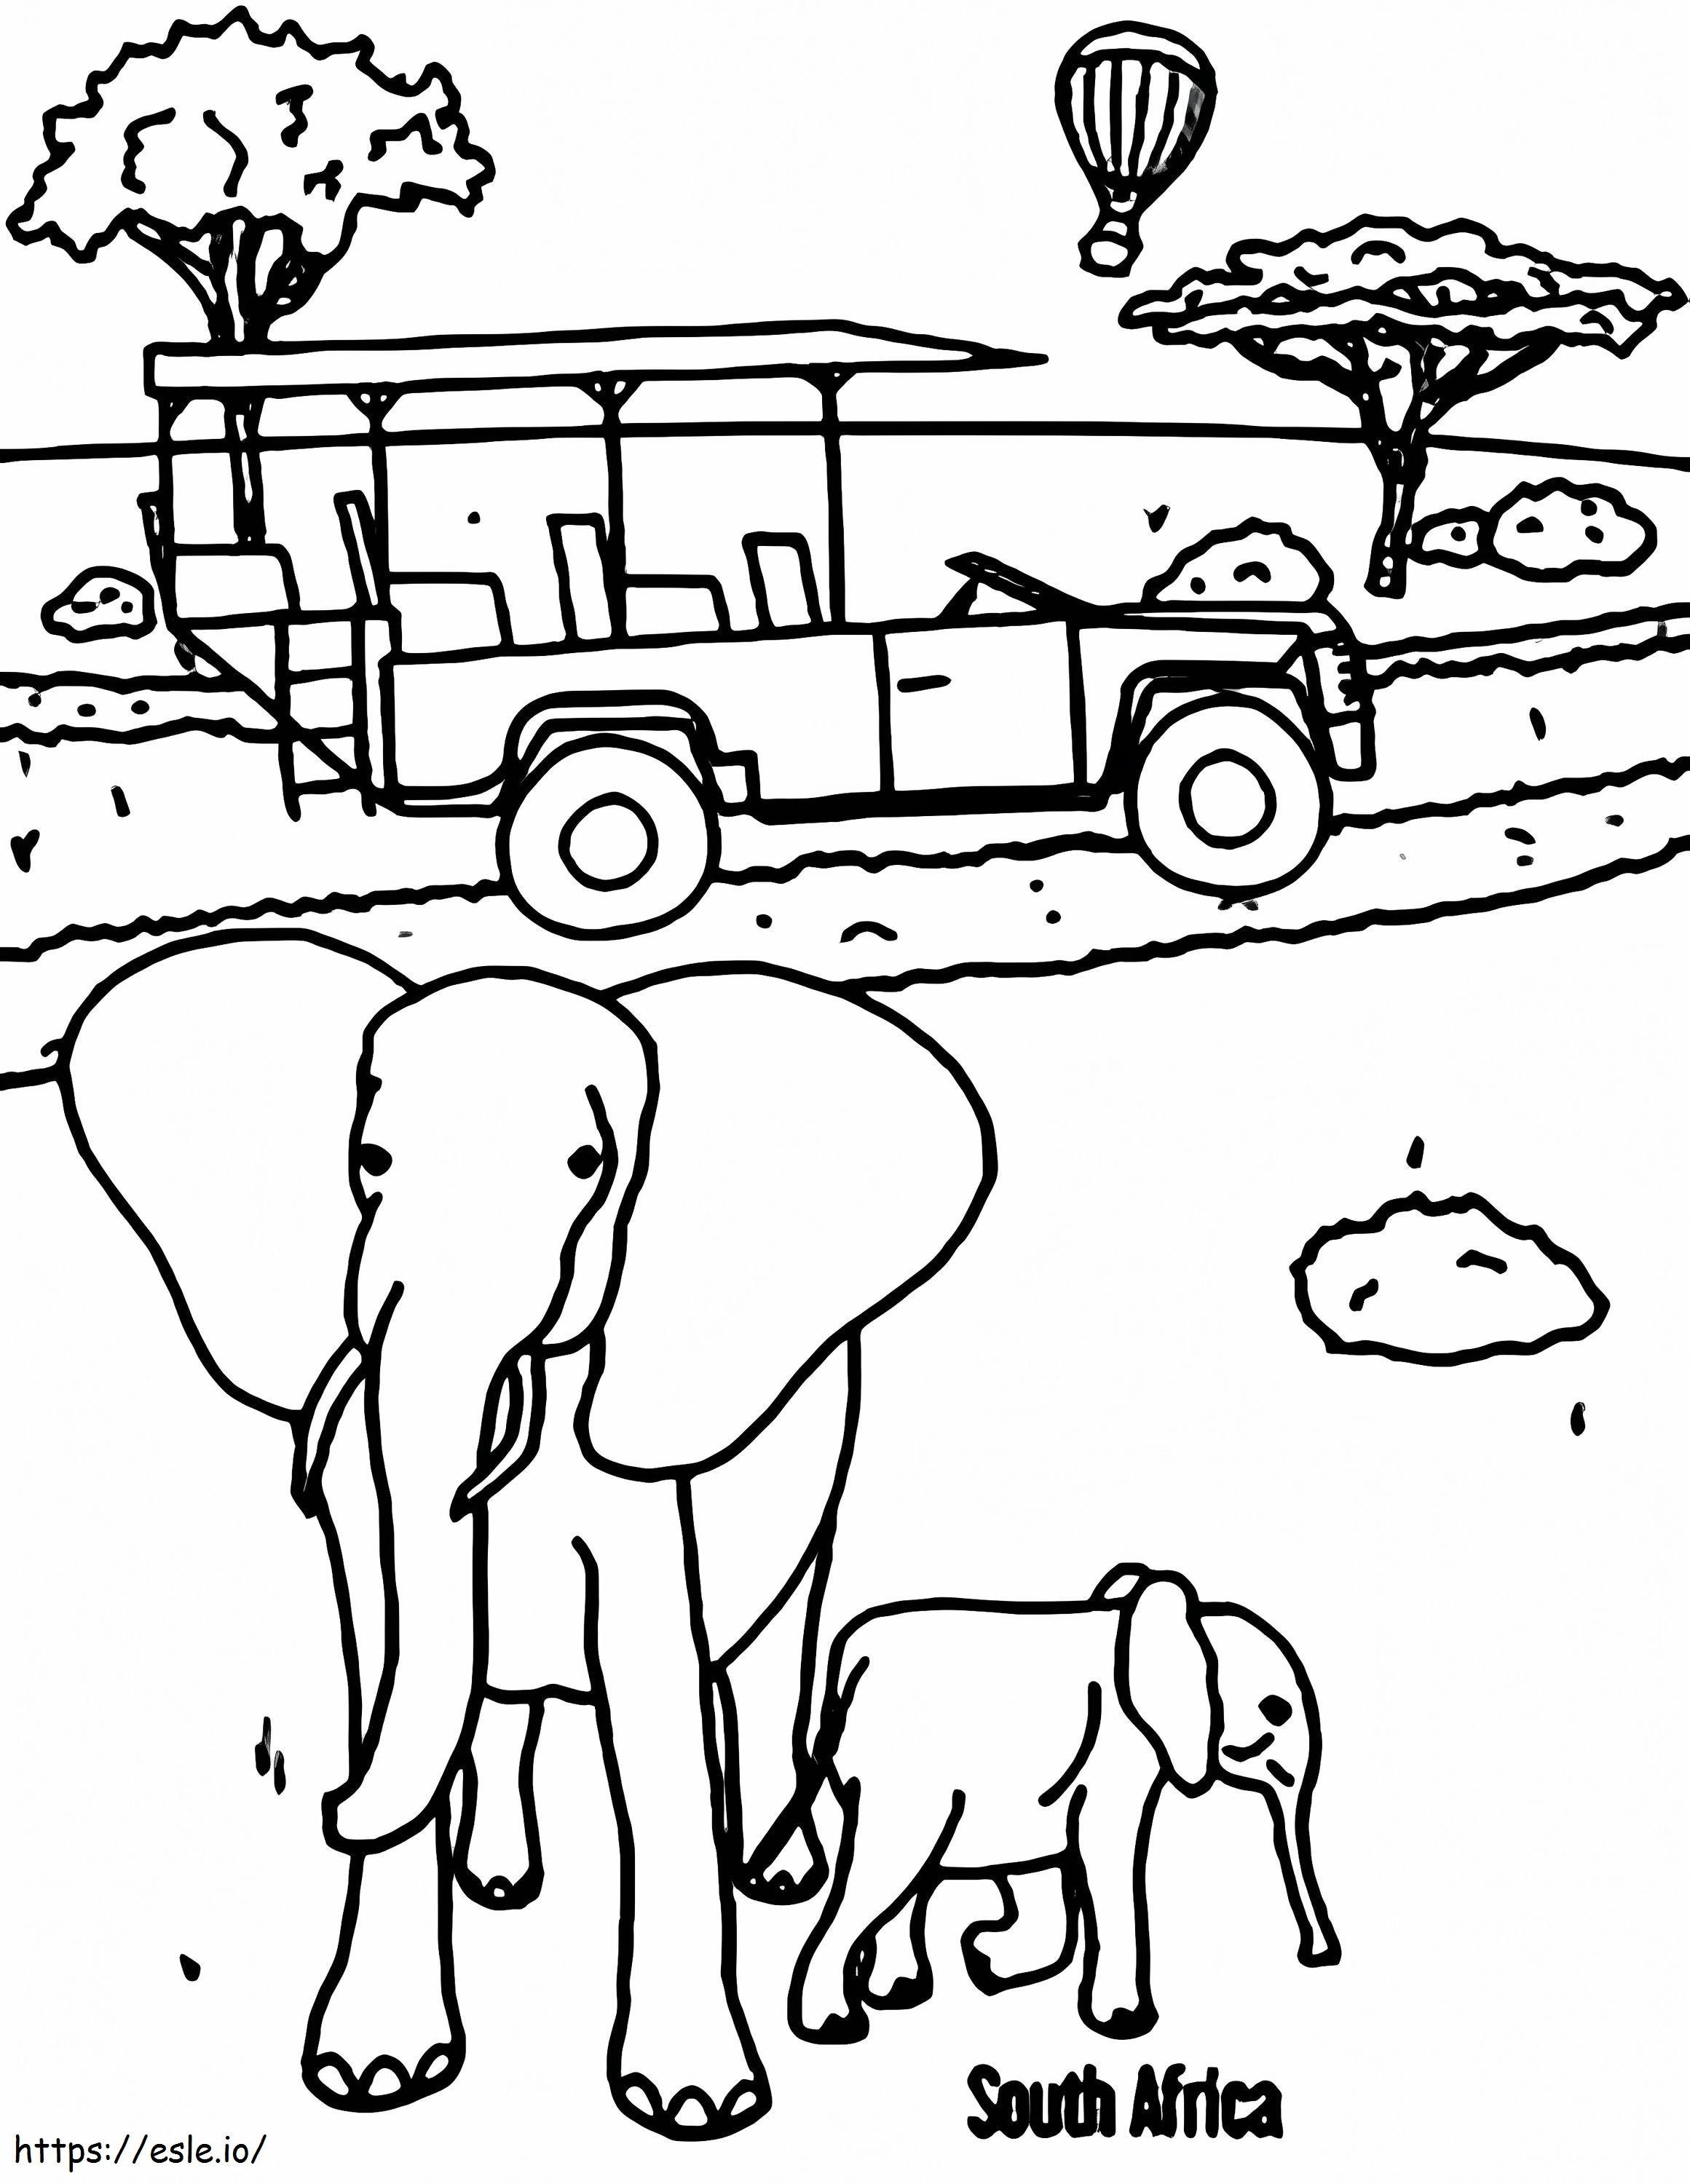 South Africa Safari 1 coloring page